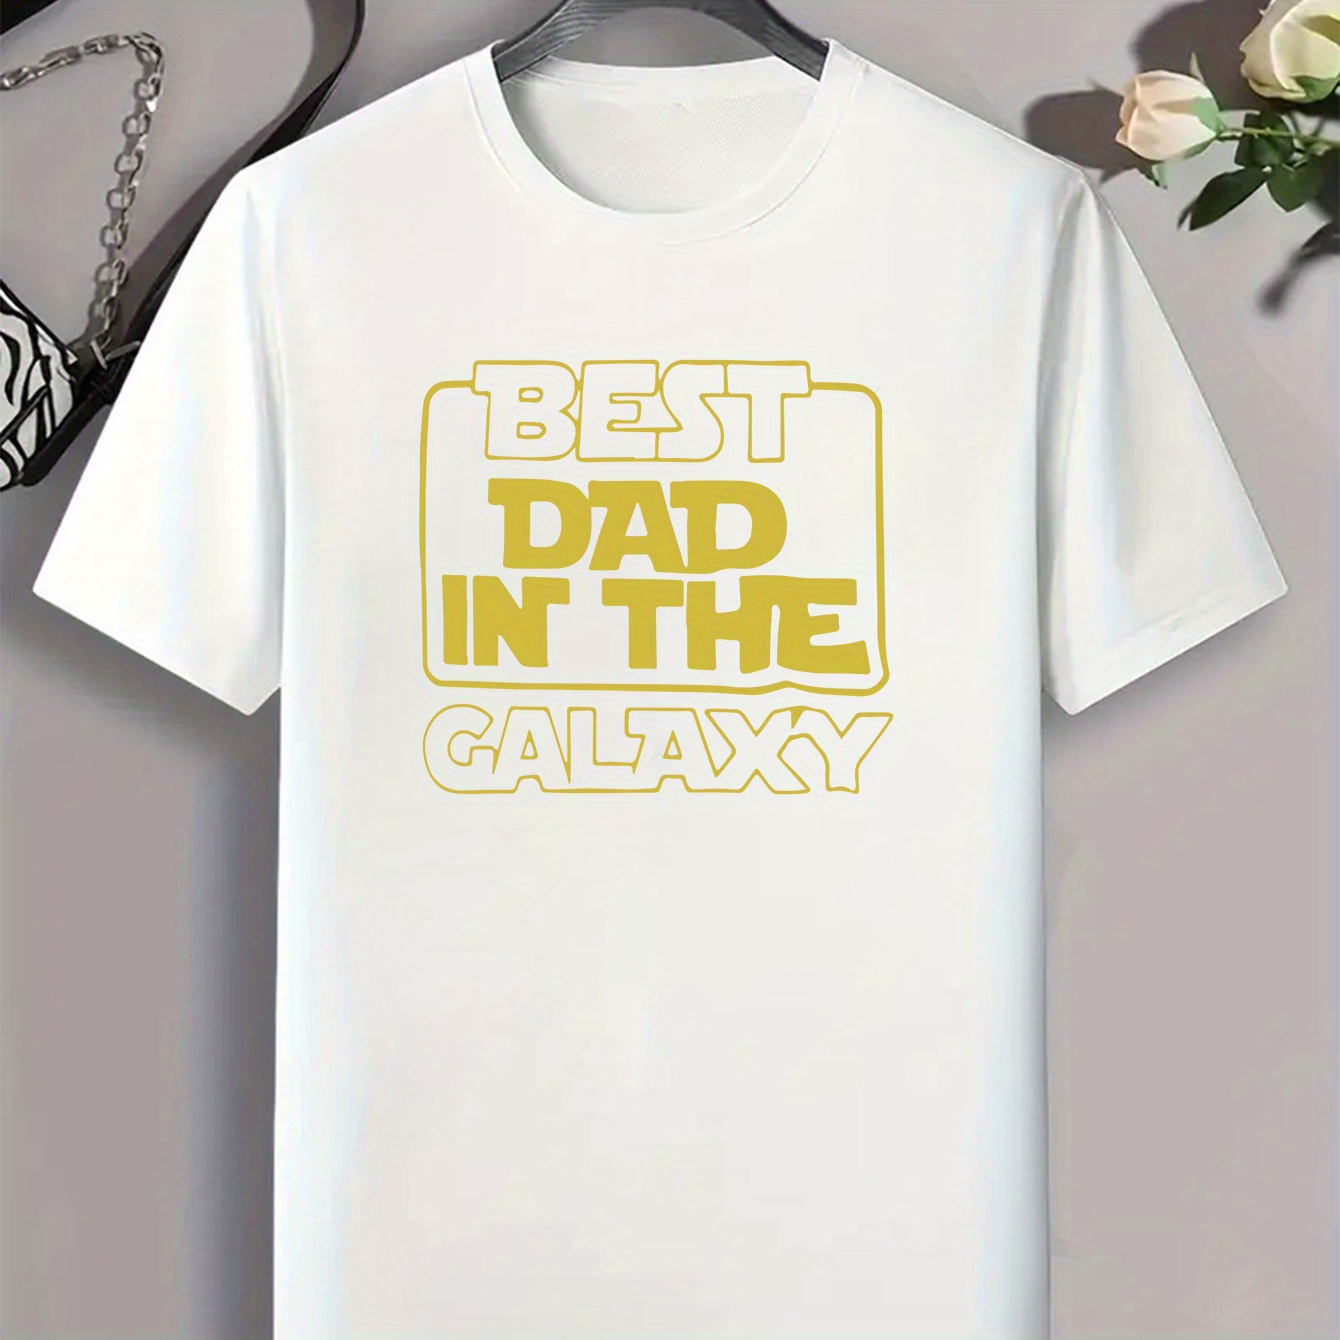 

best Dad In The Galaxy" Letters Print Casual Crew Neck Short Sleeves For Men, Quick-drying Comfy Casual Summer T-shirt For Daily Wear Work Out And Vacation Resorts